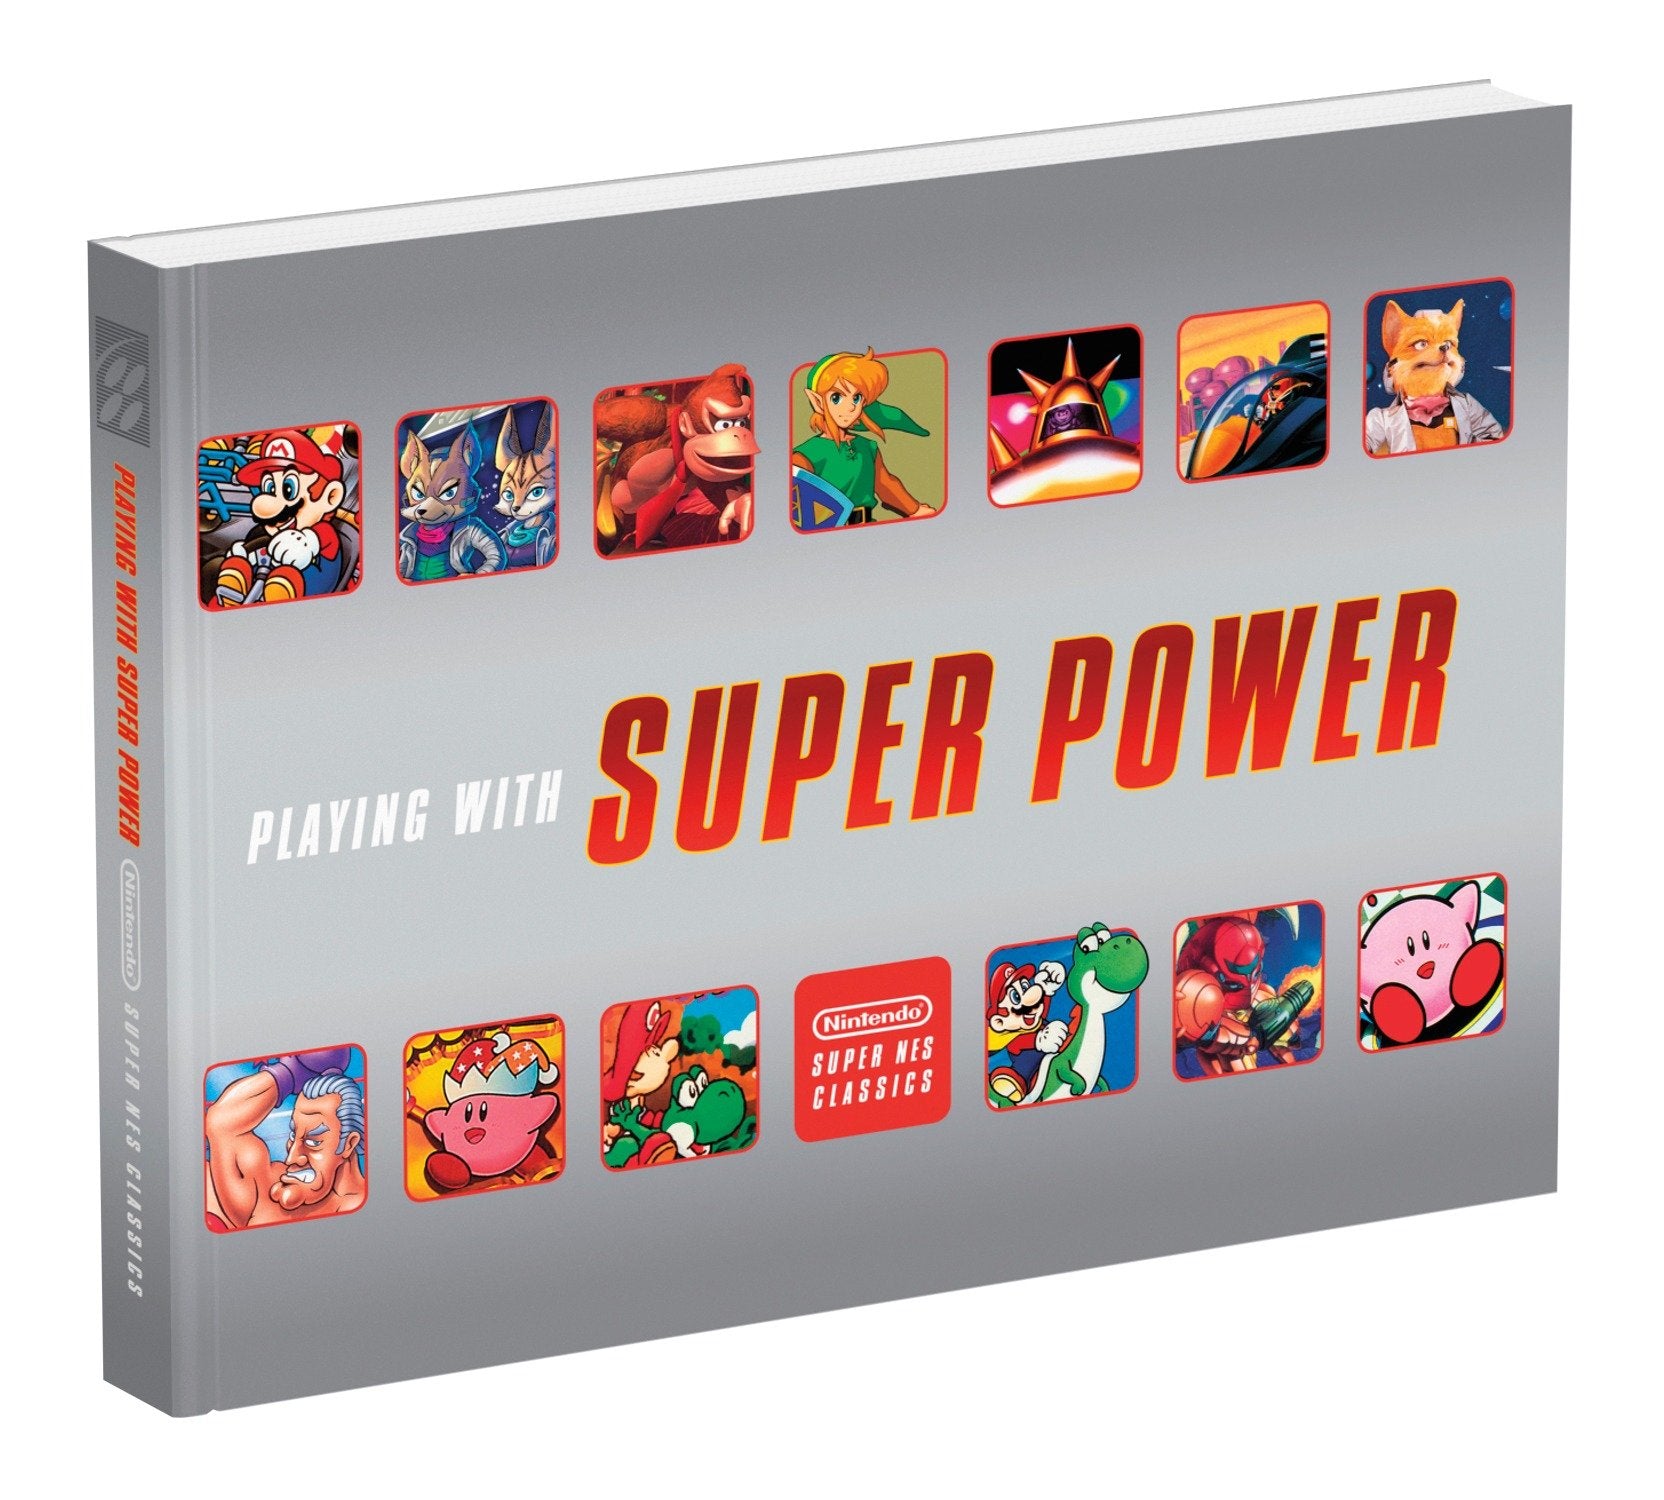 Playing With Super Power: Nintendo Super NES Classics (Paperback)